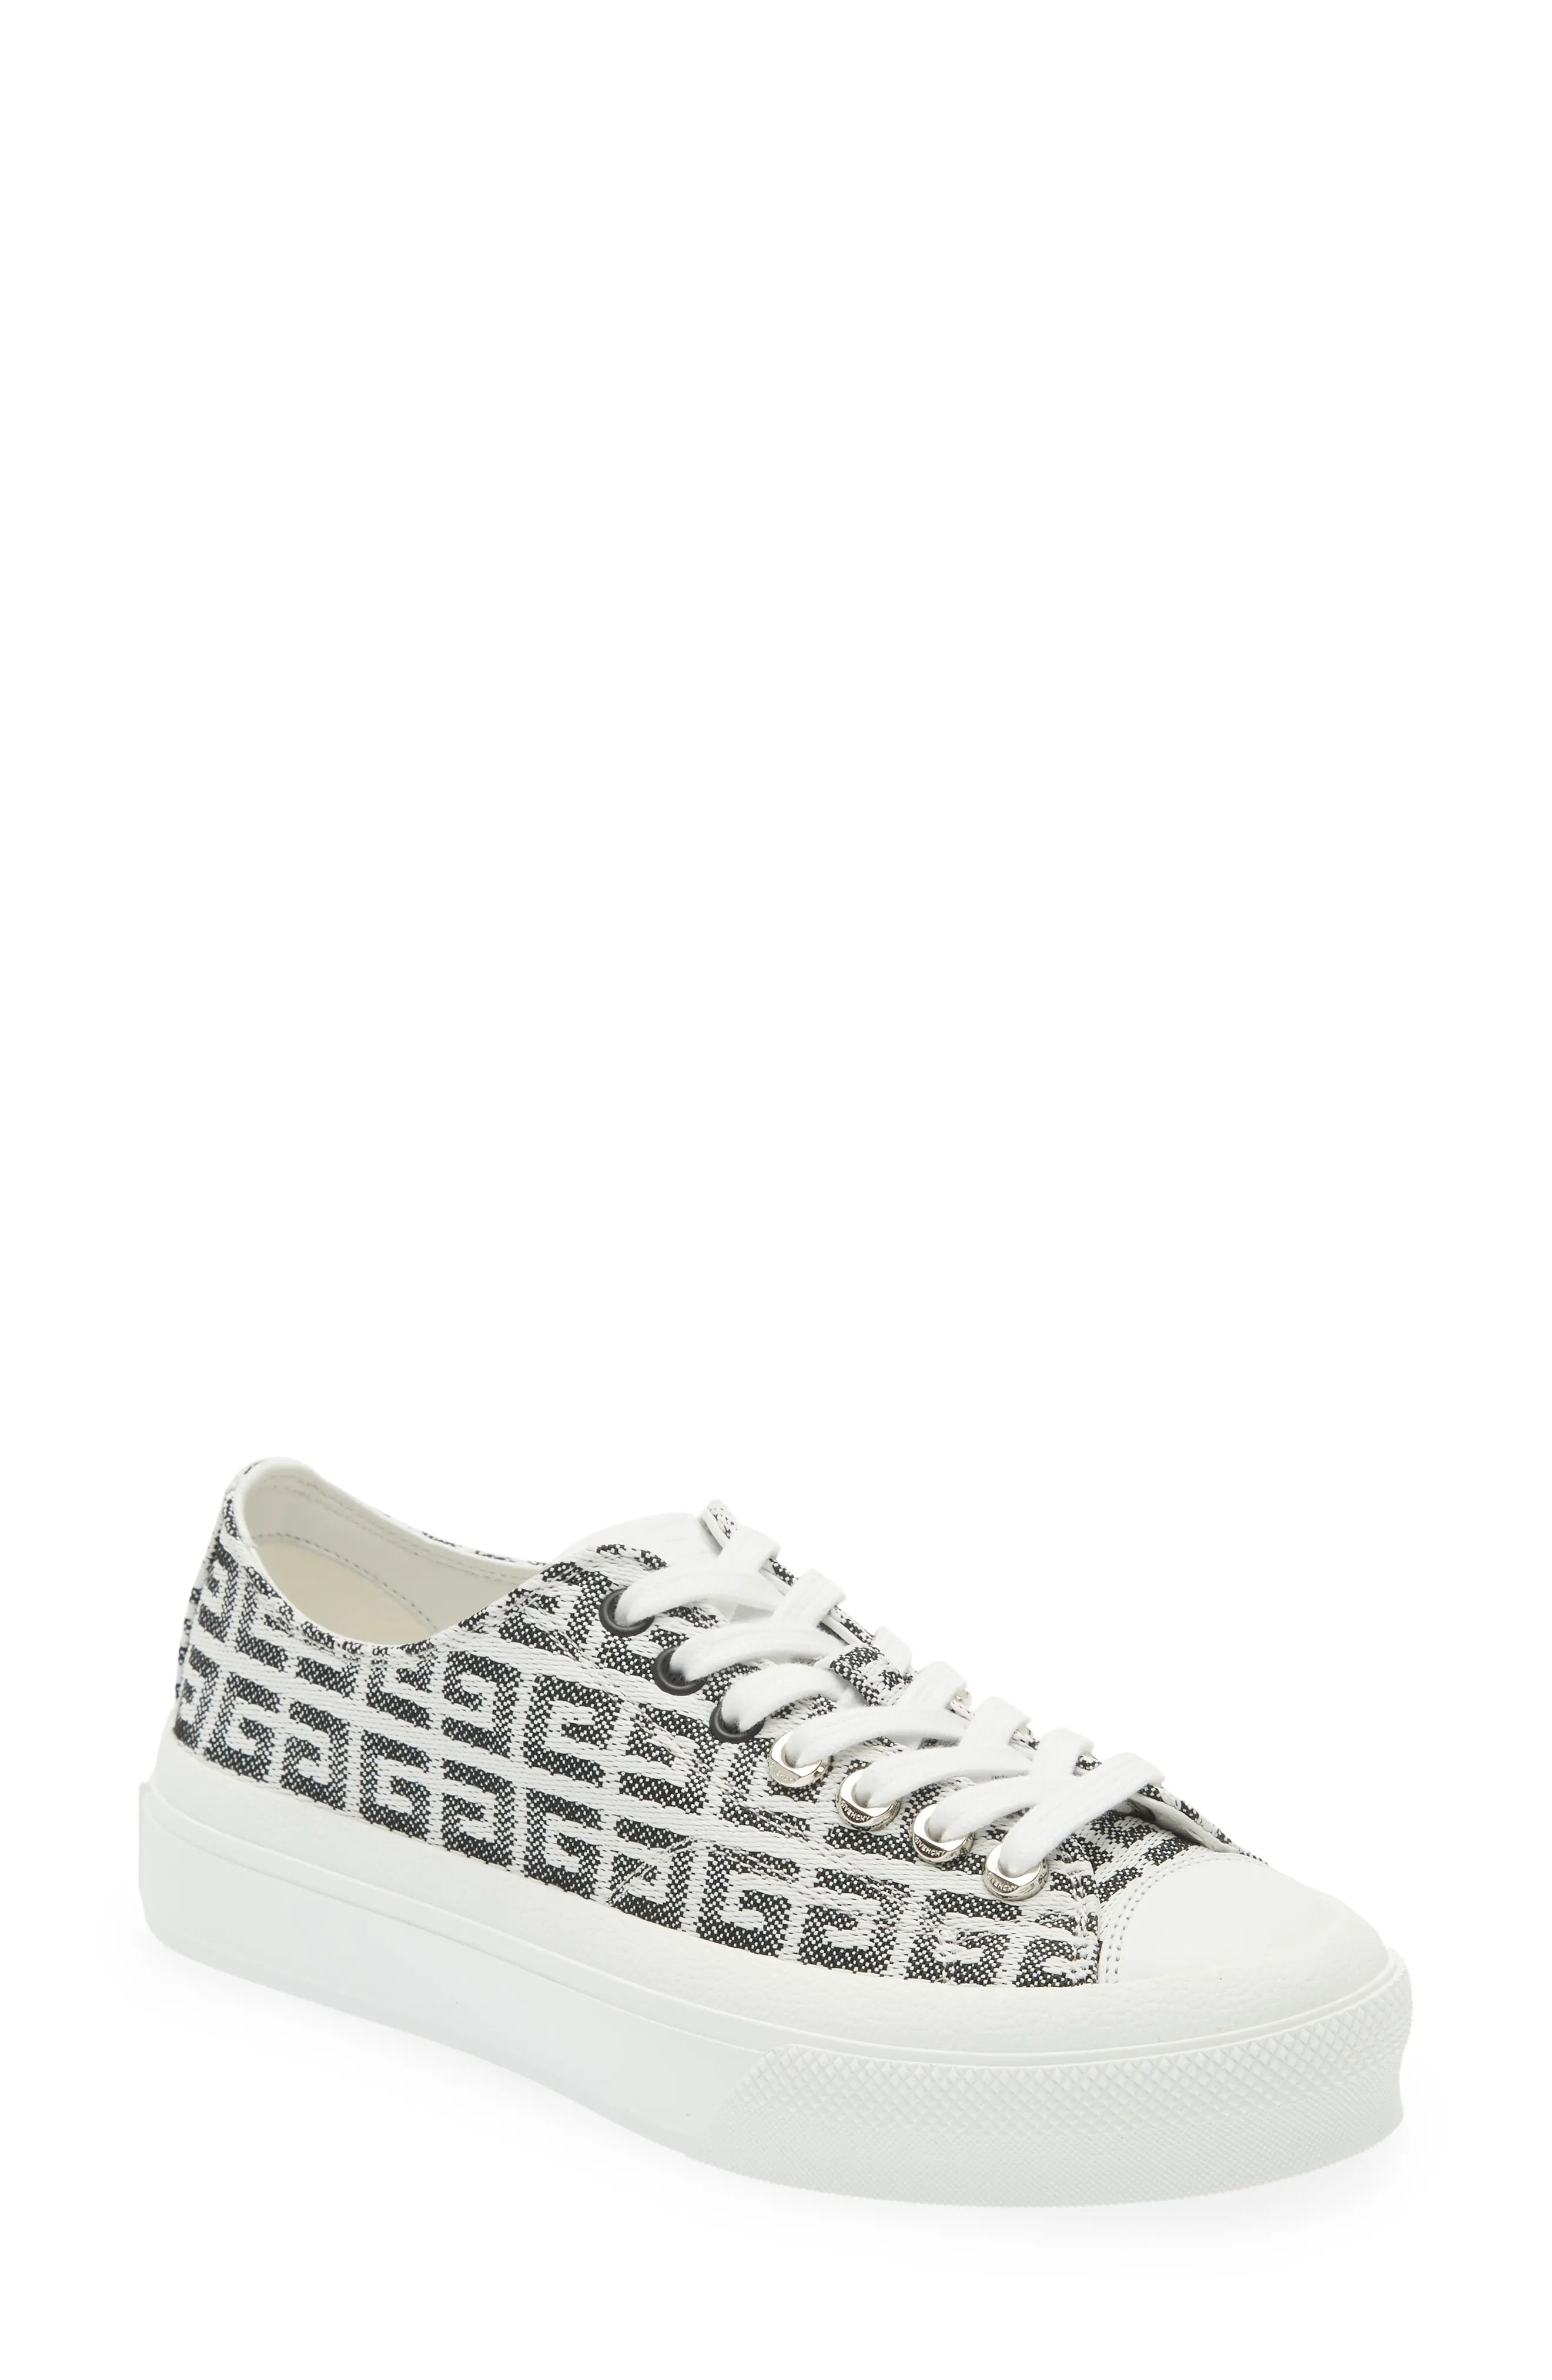 Givenchy City Jacquard Low Top Sneaker in 004 Black/White at Nordstrom, Size 8.5Us | Nordstrom